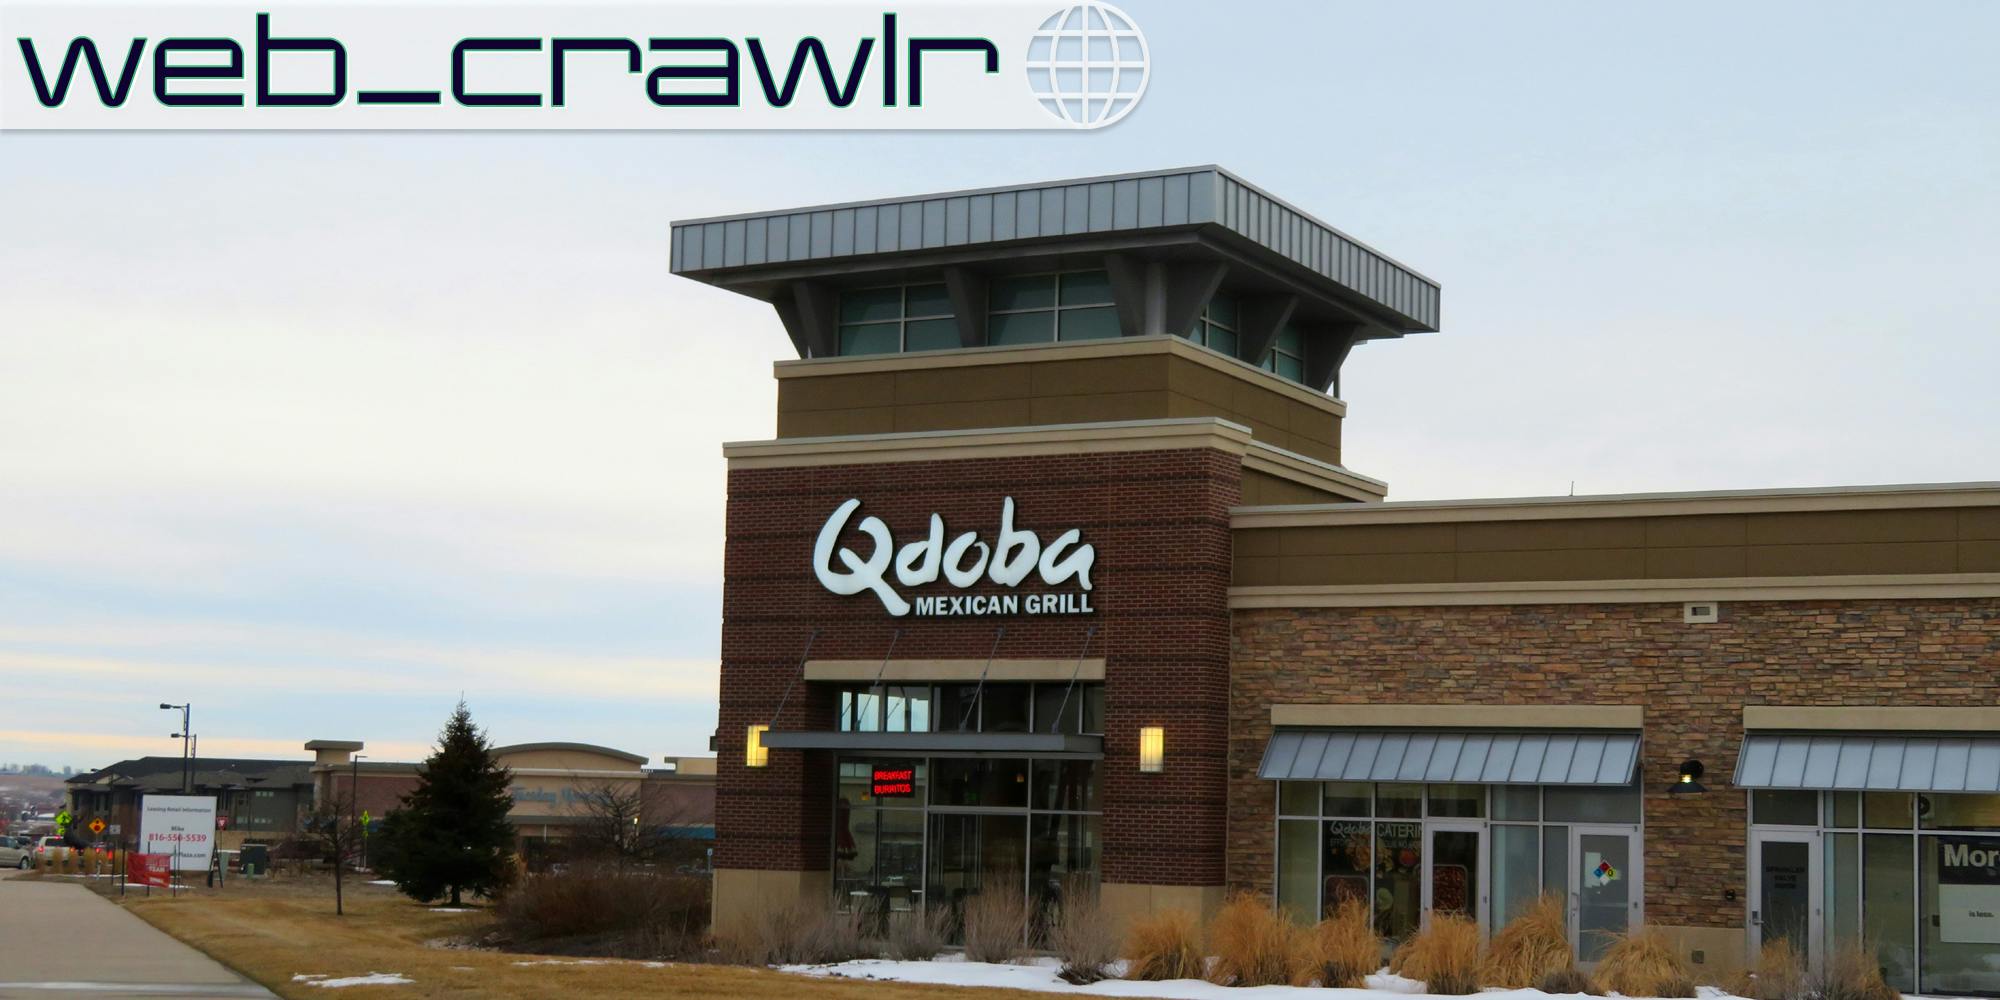 A Qdoba restaurant. The Daily Dot newsletter web_crawlr logo is in the top left corner.